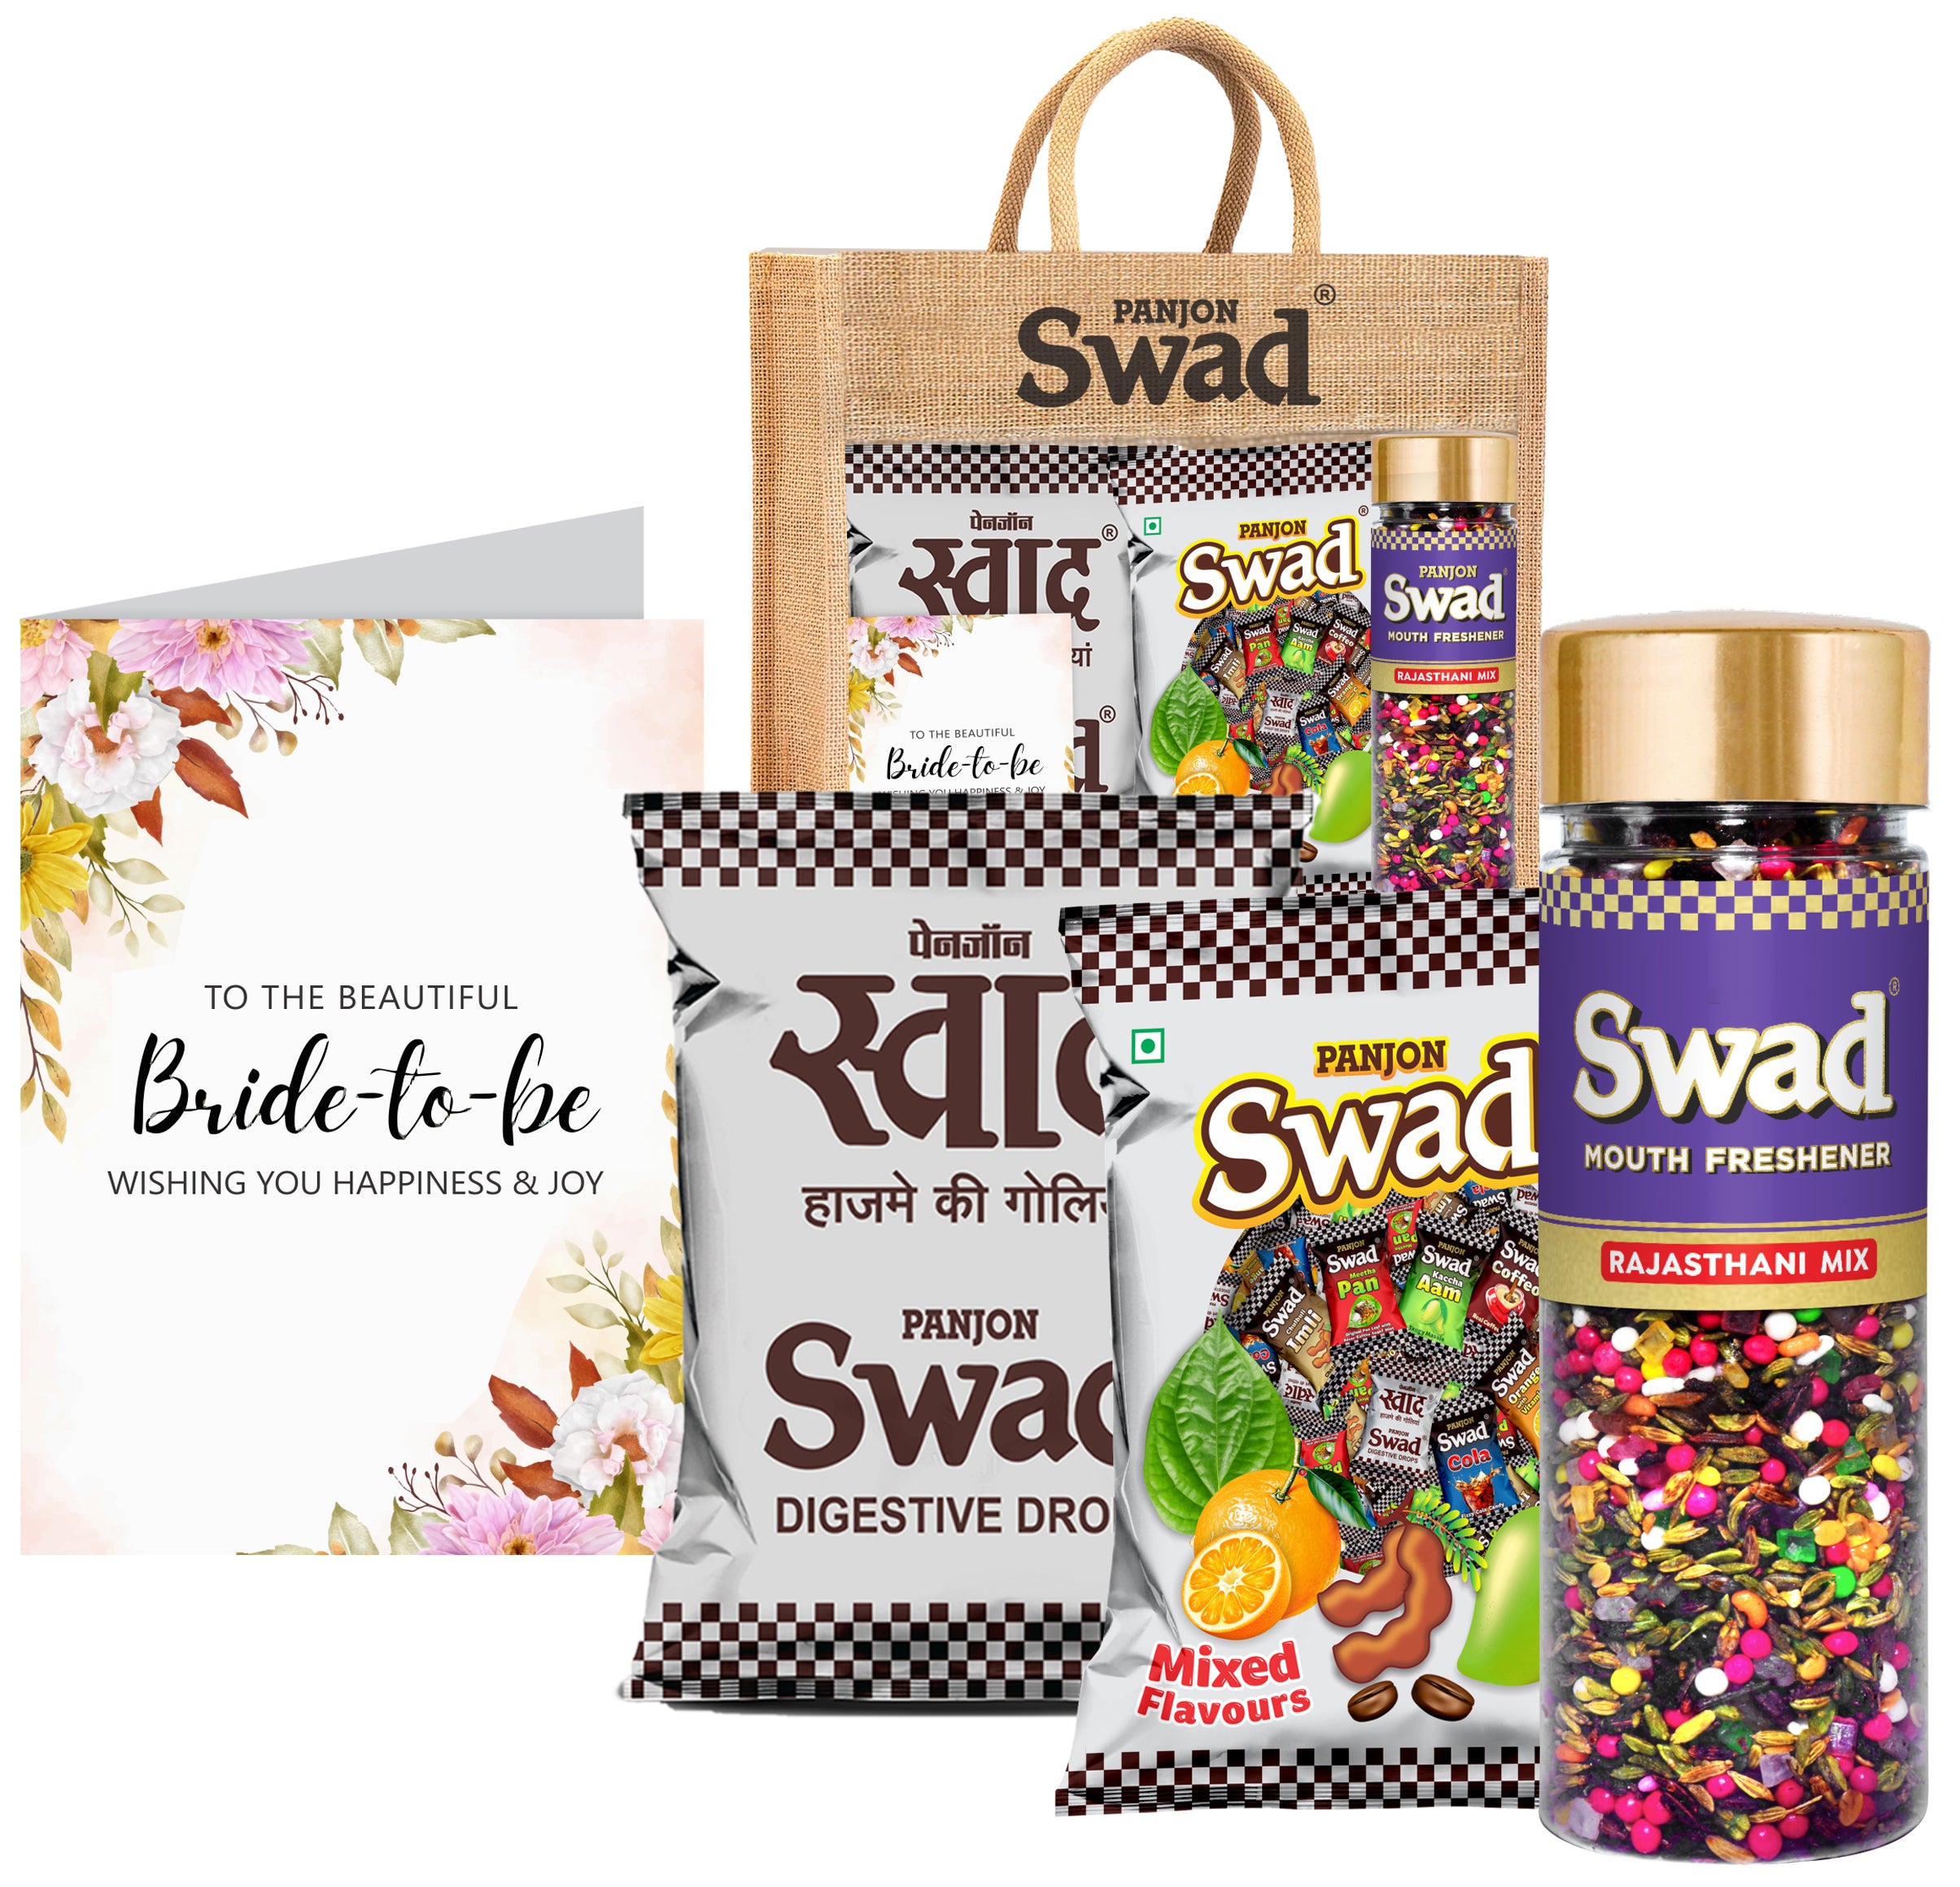 Swad Prospective Bride To Be/engaged Gift with Card (25 Swad Candy, 25 Mixed Toffee, Rajasthani Mix Mukhwas) in Jute Bag